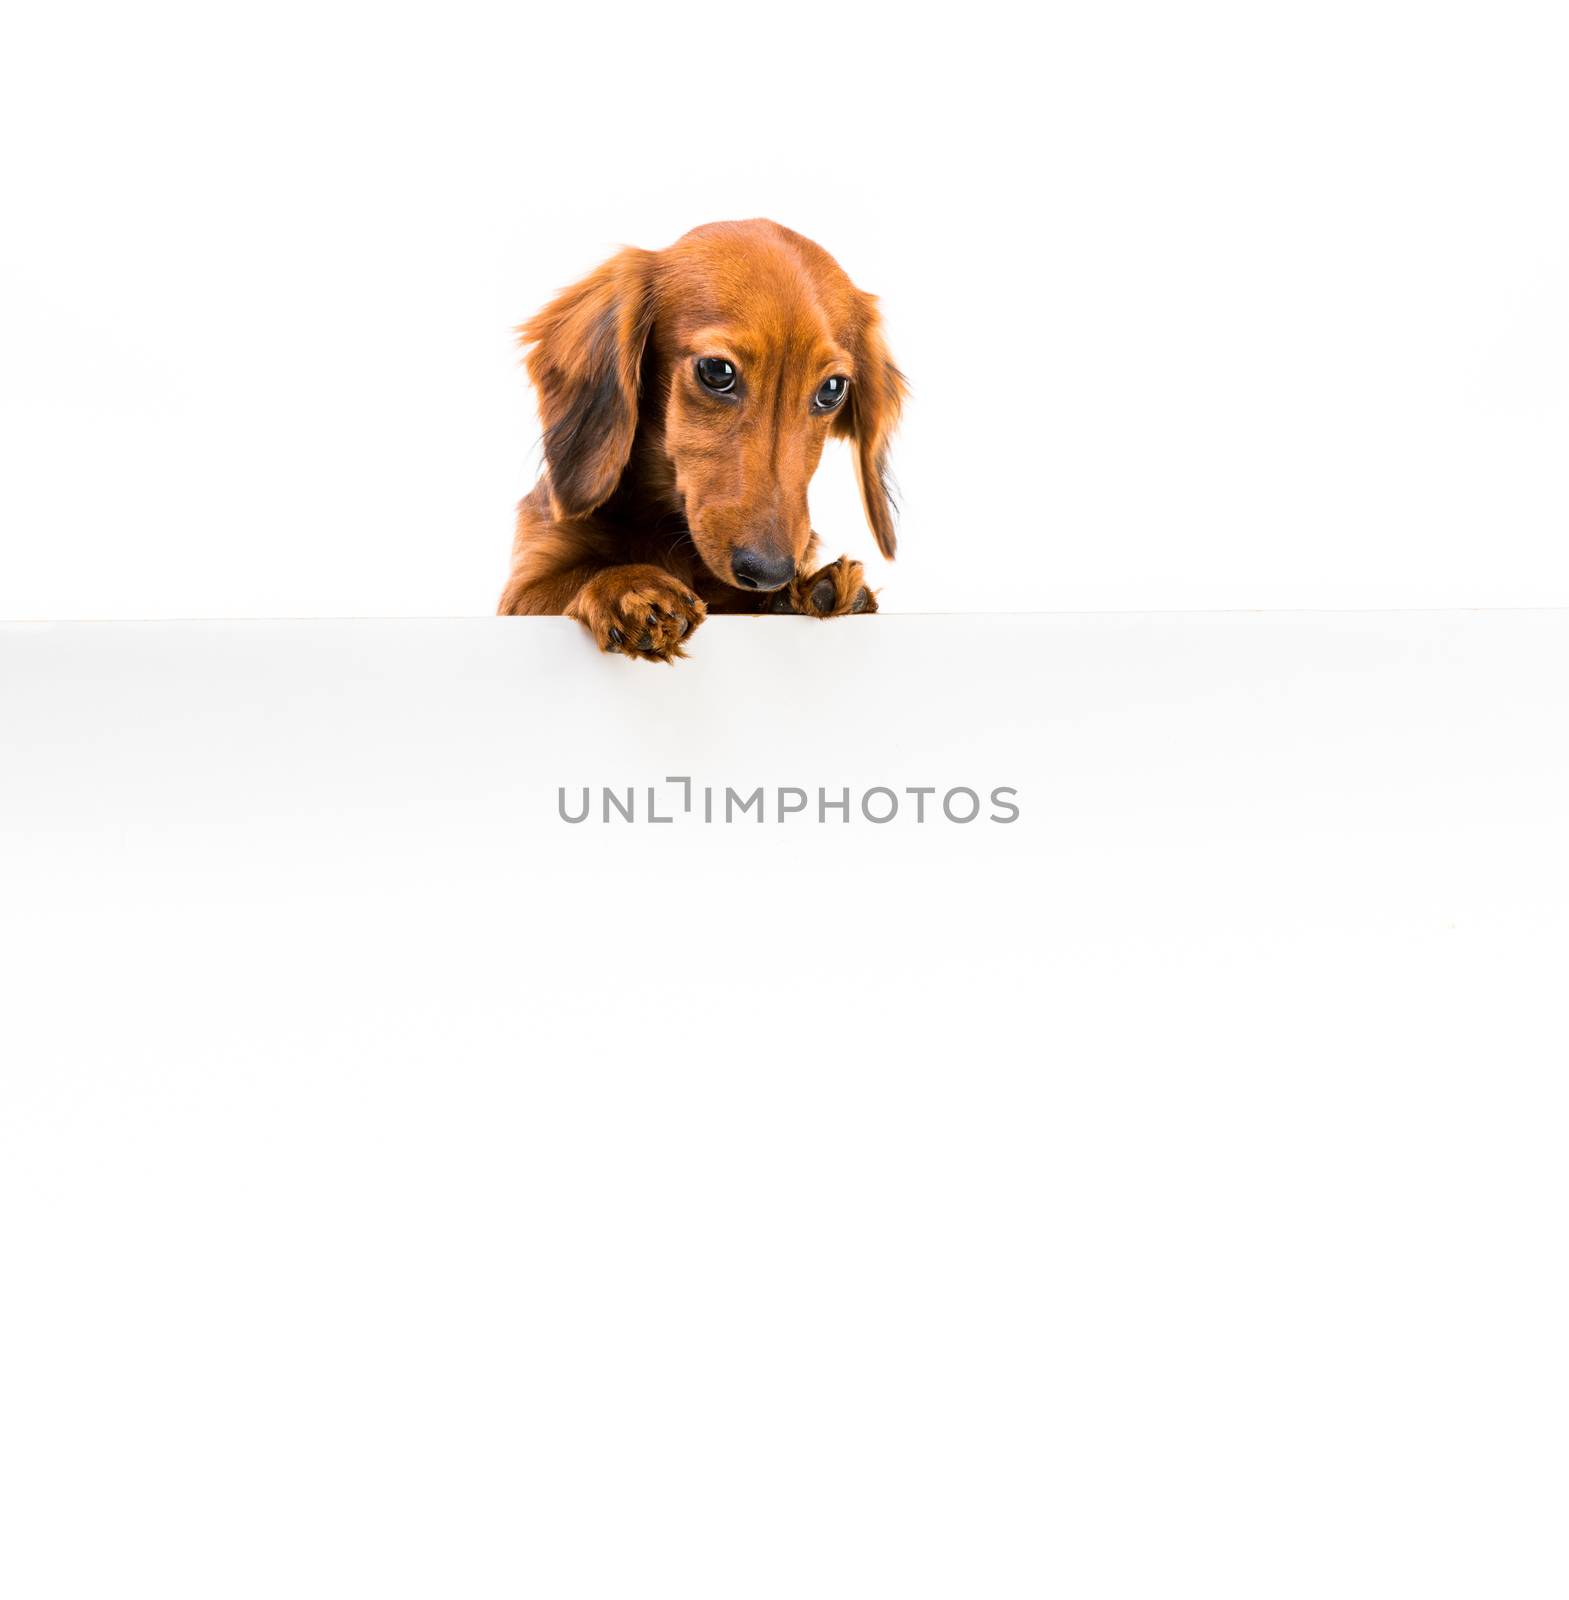 dog breed dachshund with a whiteboard foryour text